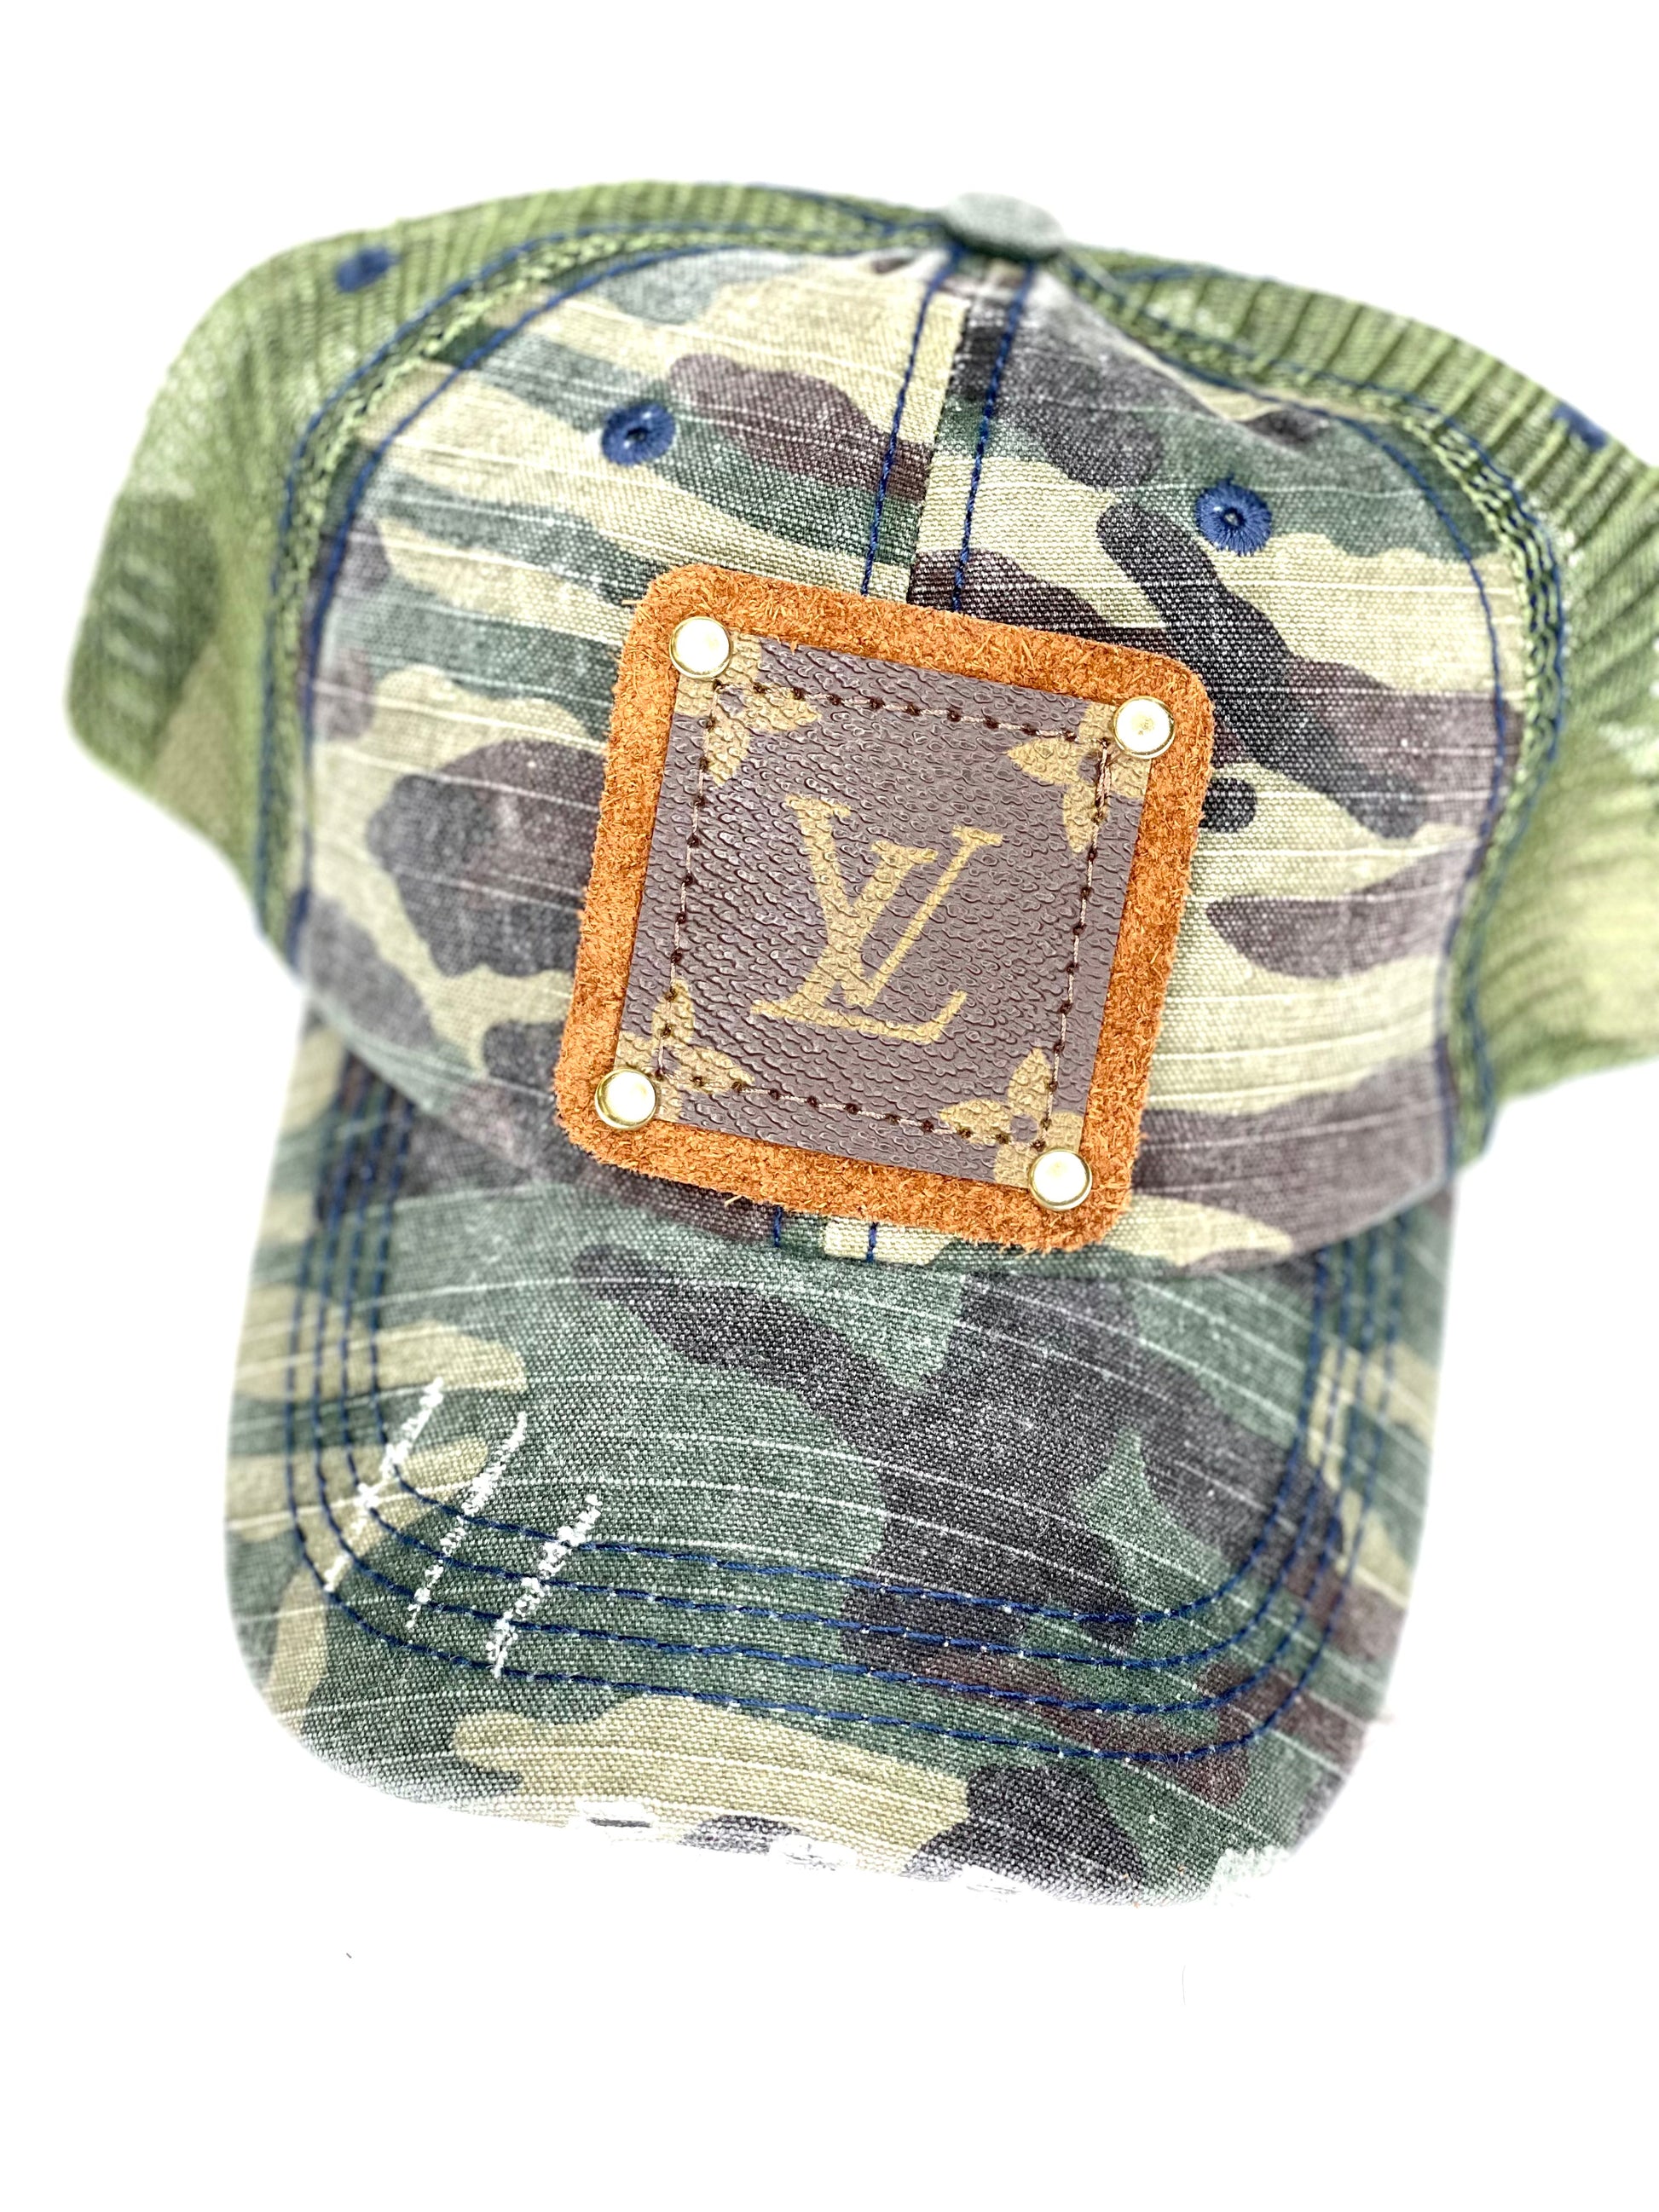 DD1 - Faded Distressed Camouflage Pony Trucker Hat Green Mesh Back Brown/Antique - Patches Of Upcycling